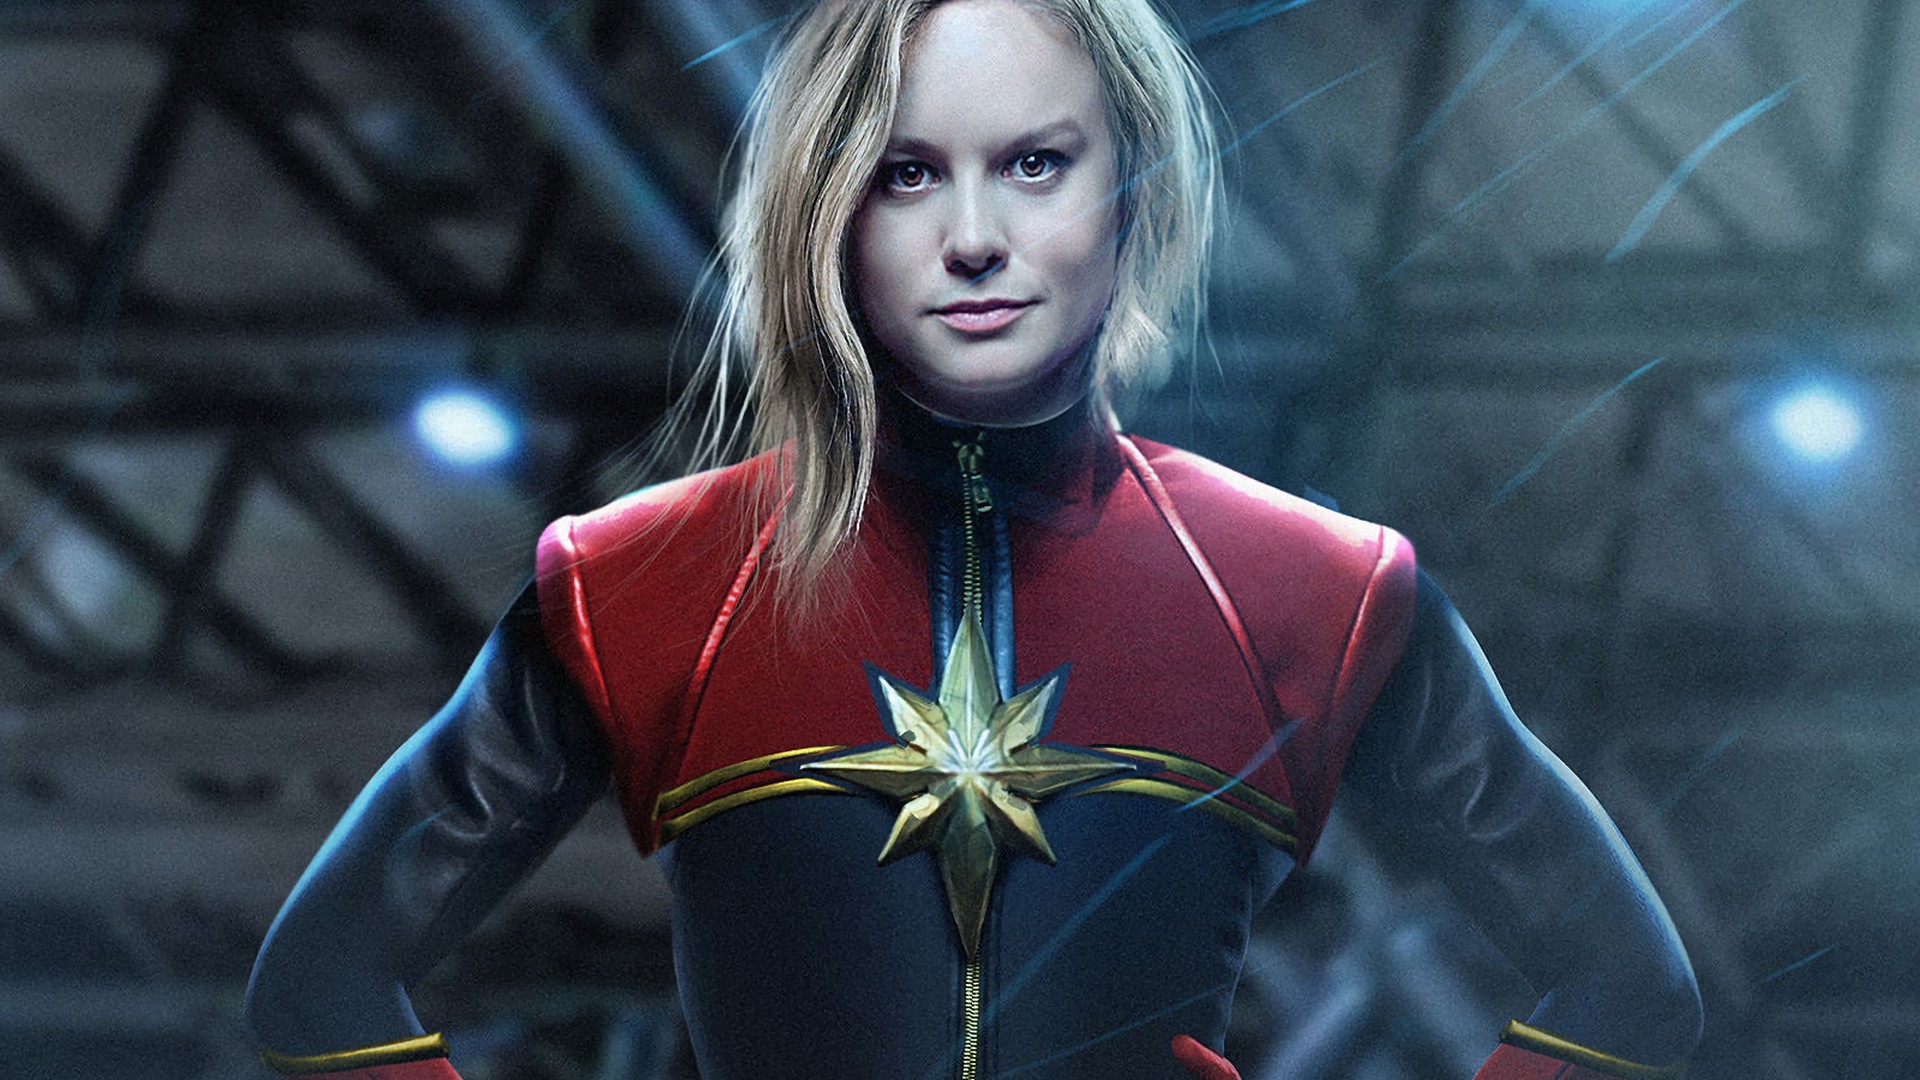 Captain Marvel Movies Wallpaper HD with high-resolution 1920x1080 pixel. You can use this poster wallpaper for your Desktop Computers, Mac Screensavers, Windows Backgrounds, iPhone Wallpapers, Tablet or Android Lock screen and another Mobile device